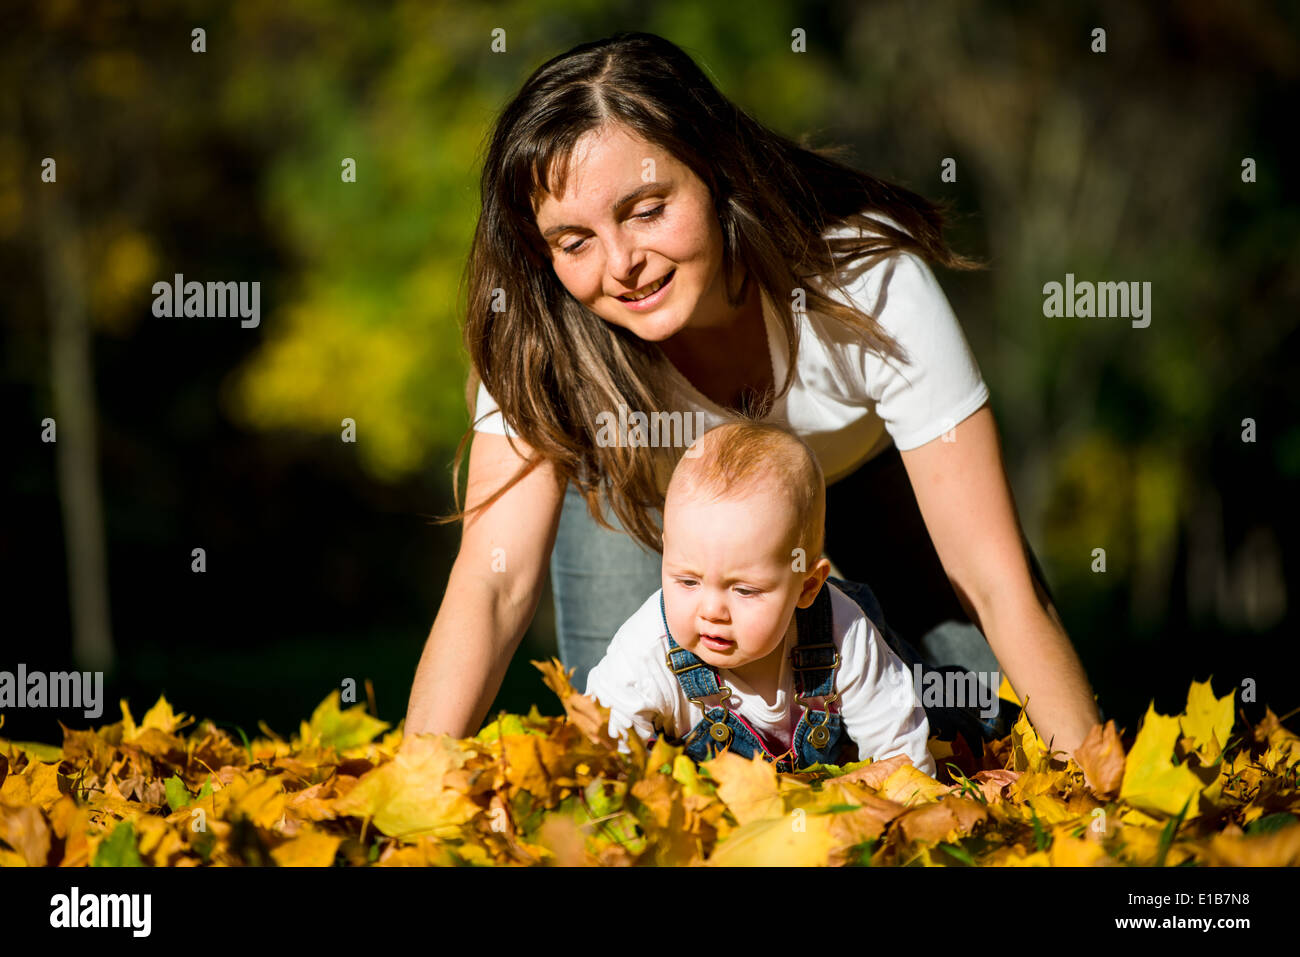 Mother playing with her baby in fallen leaves on fall sunny day Stock Photo